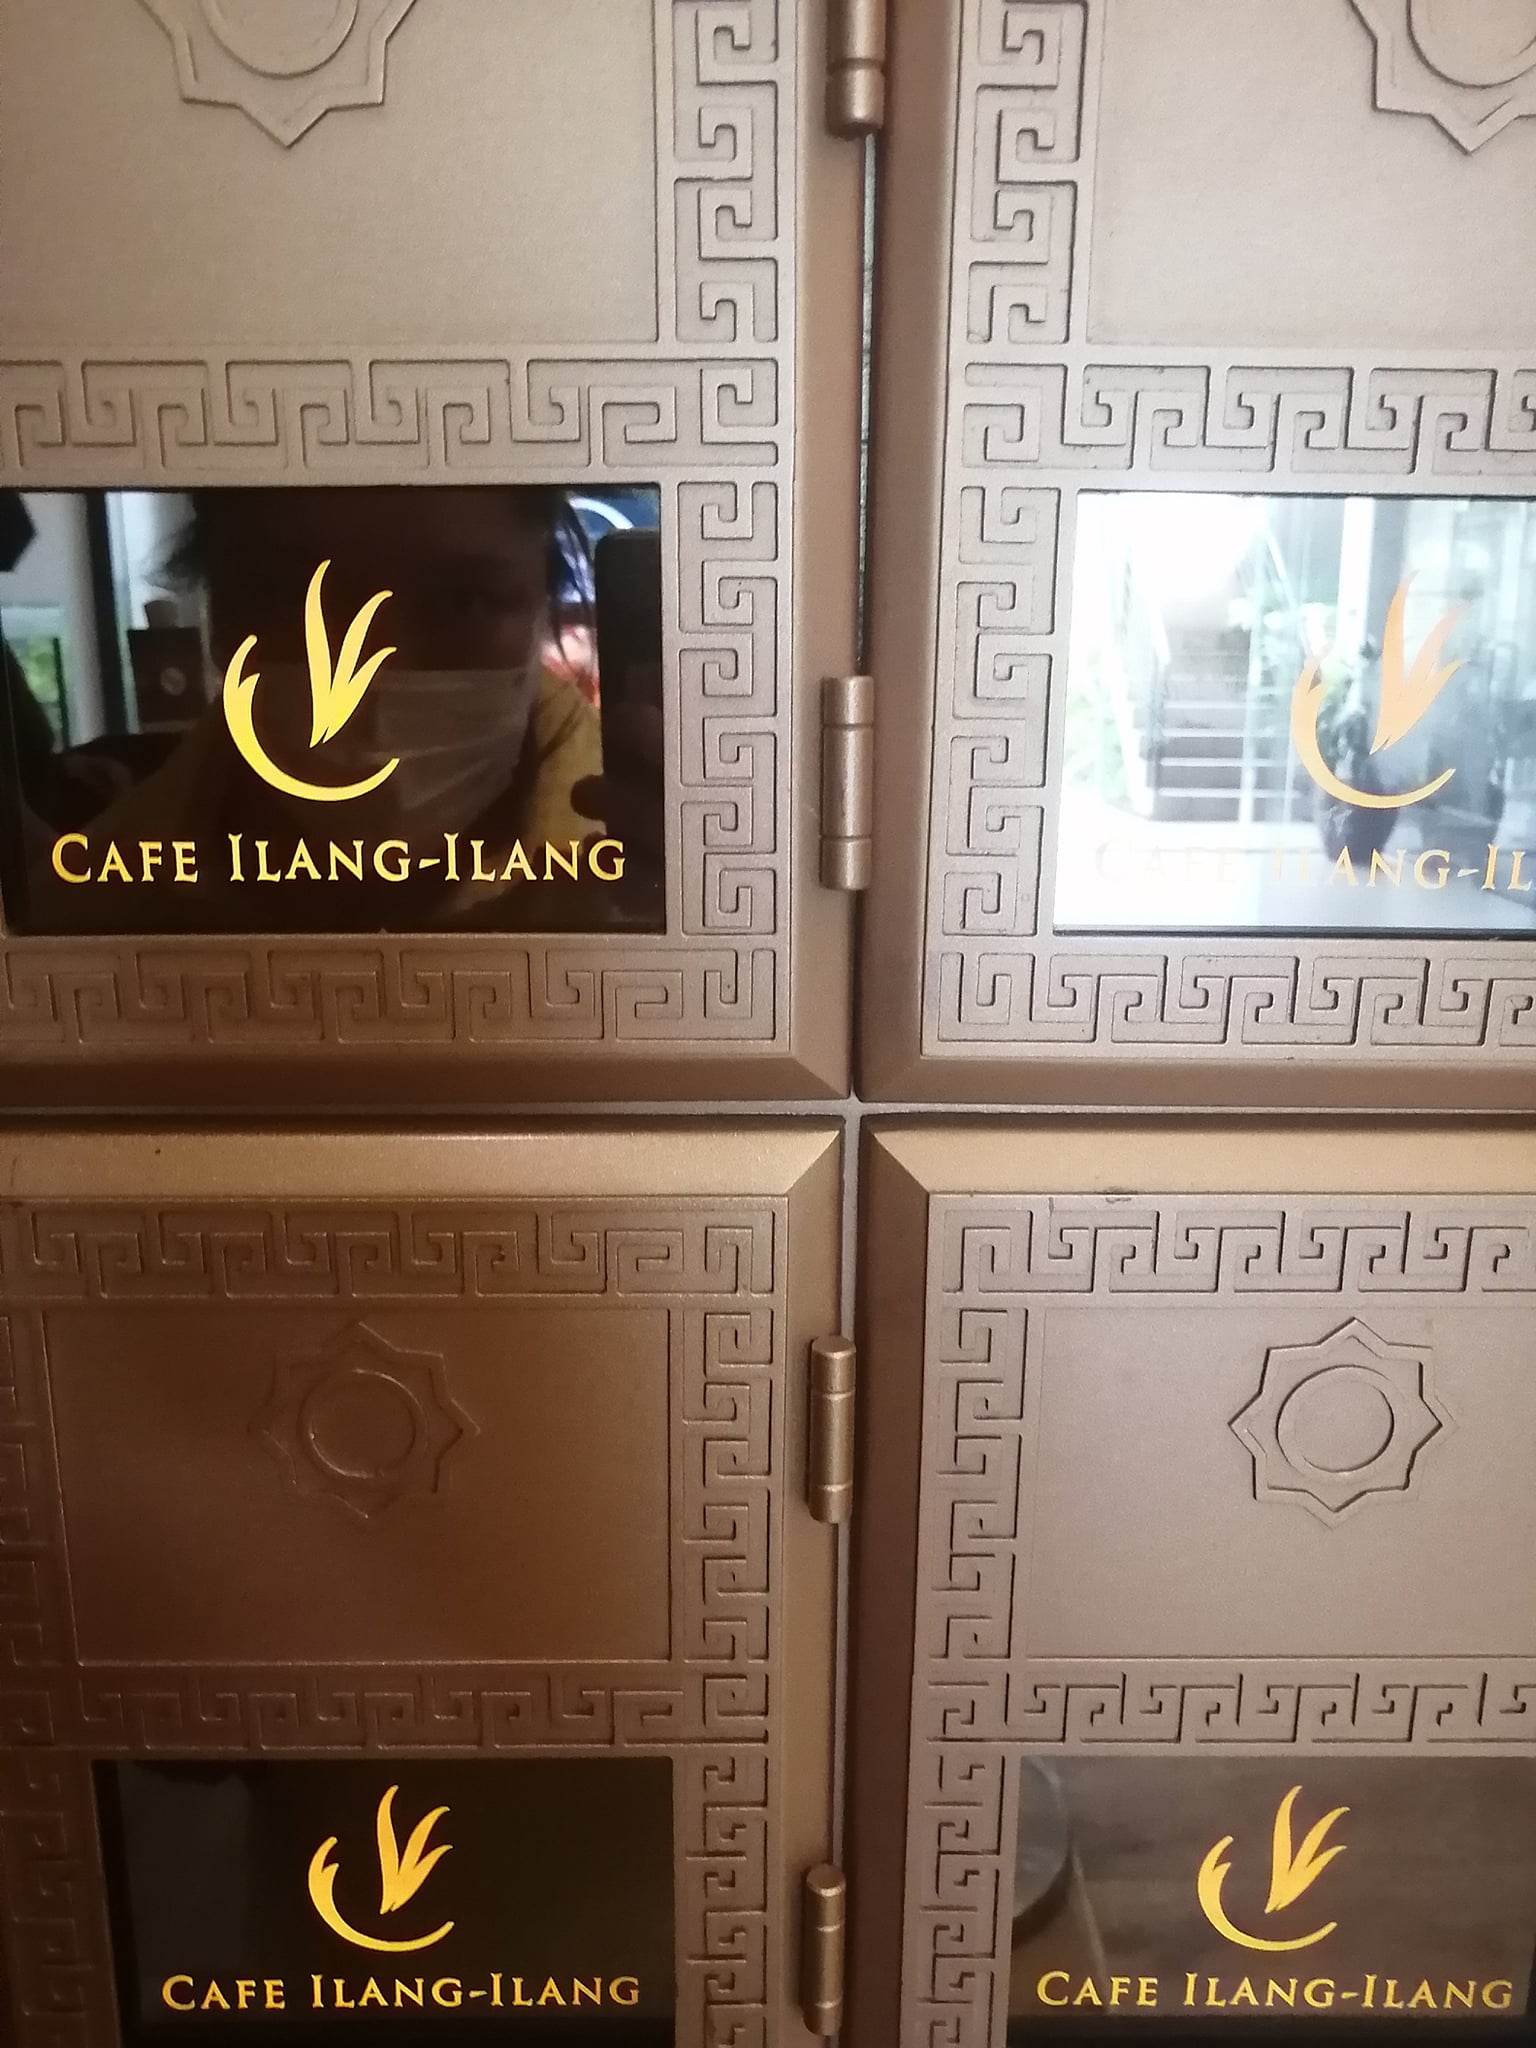 The Cafe Ilang-Ilang logo on wall details with the author reflected in one pane